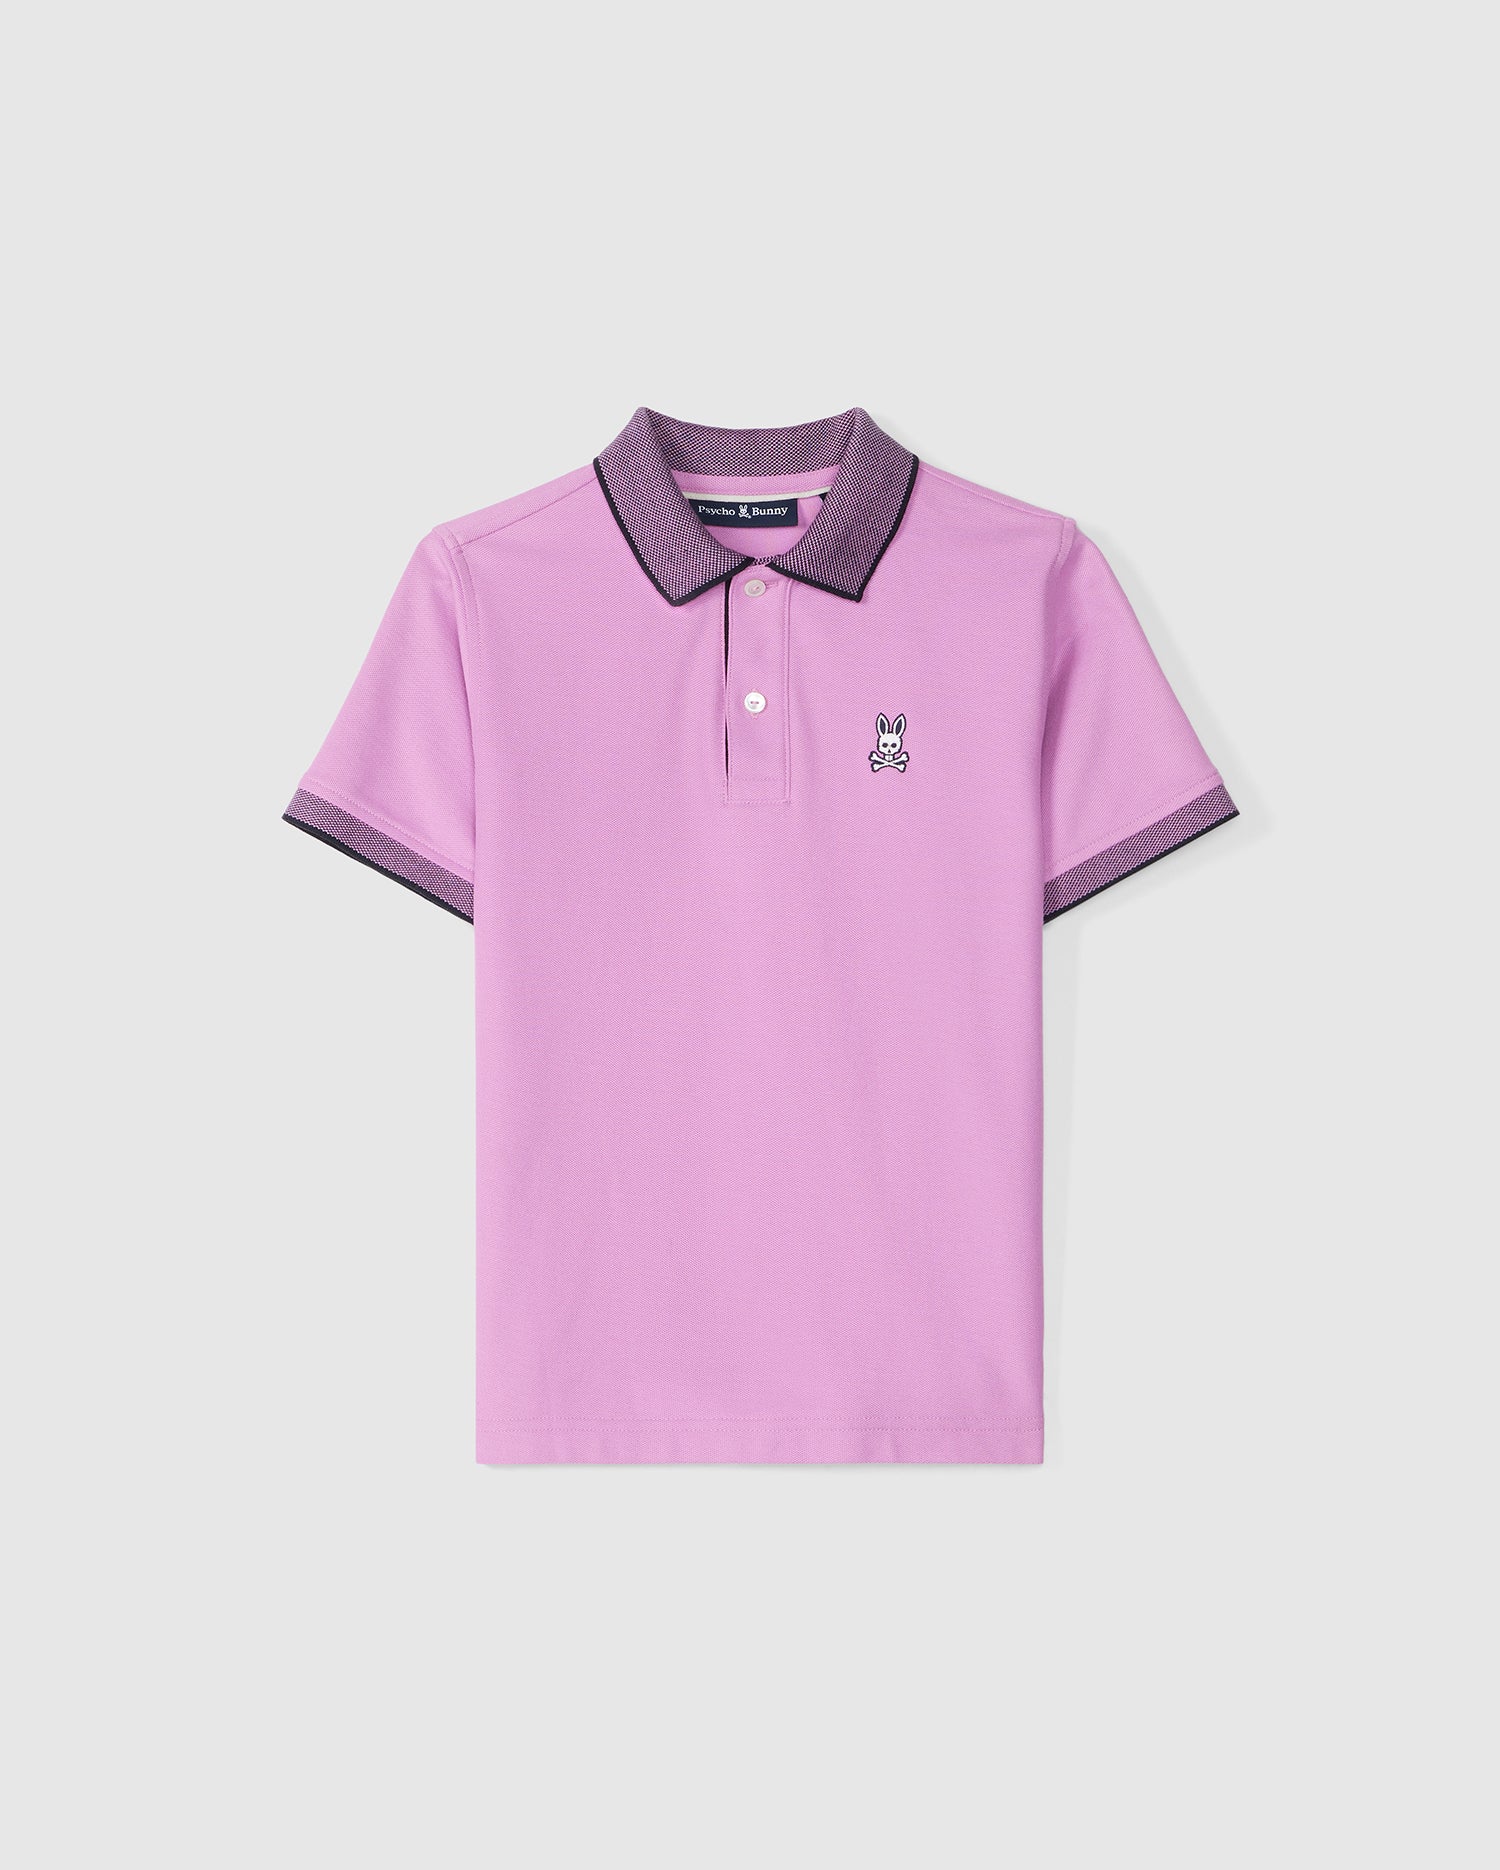 A lavender KIDS SOUTHPORT PIQUE POLO SHIRT - B0K263B200 with a dark-colored collar and sleeve edges. This Psycho Bunny kids polo features a small embroidered bunny logo on the left chest, crafted from soft Pima cotton. The shirt has a classic two-button placket and is displayed on a plain, light background.